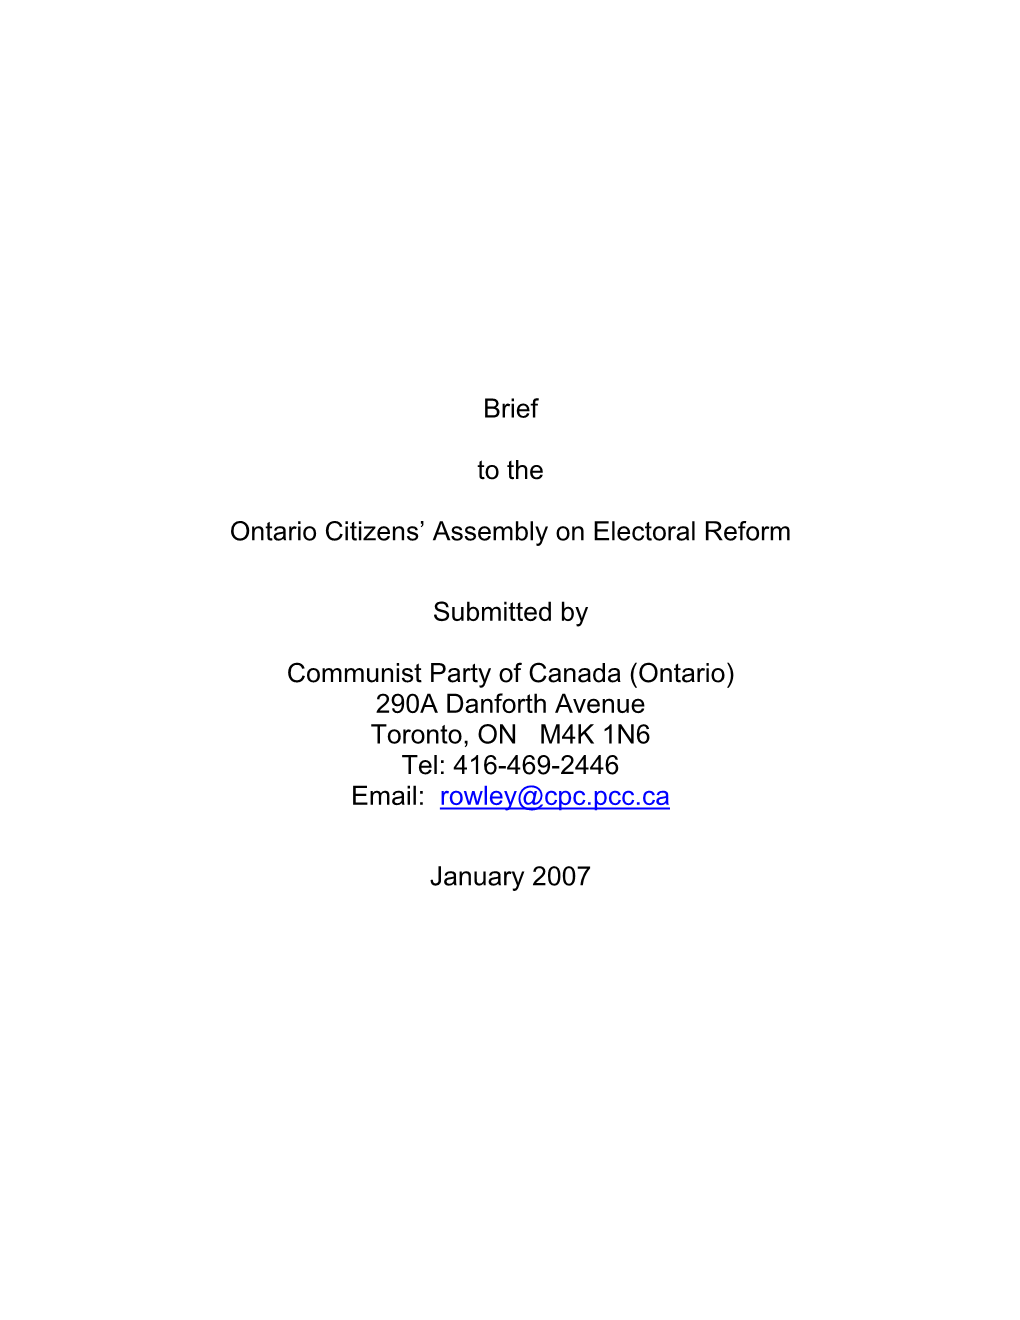 Brief to the Ontario Citizens' Assembly on Electoral Reform Submitted By